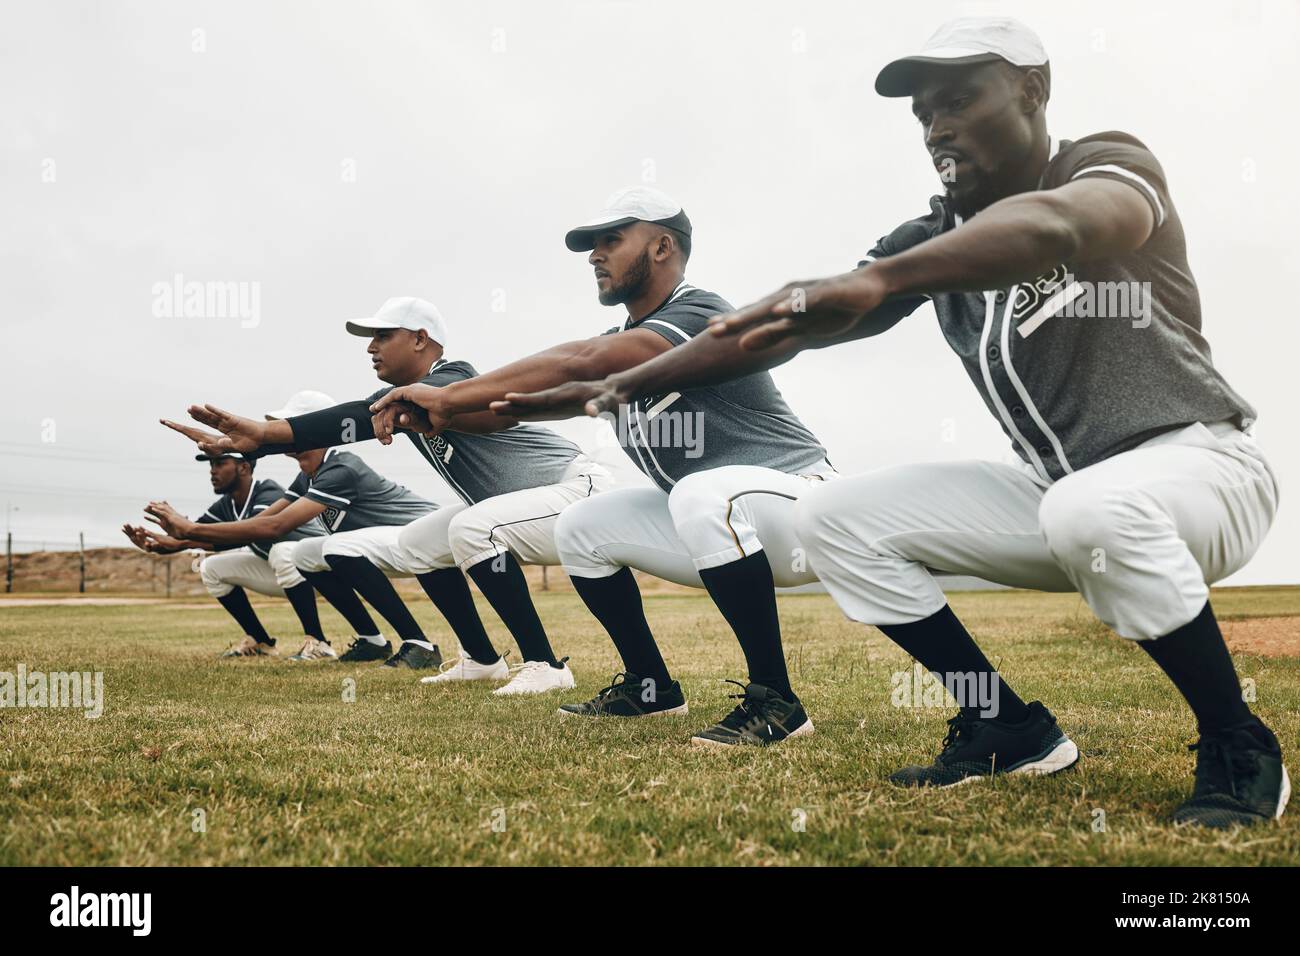 Team, stretching and baseball players for game, exercise and baseball in sportswear on field. Workout, squat and group for match prepare, wellness and Stock Photo